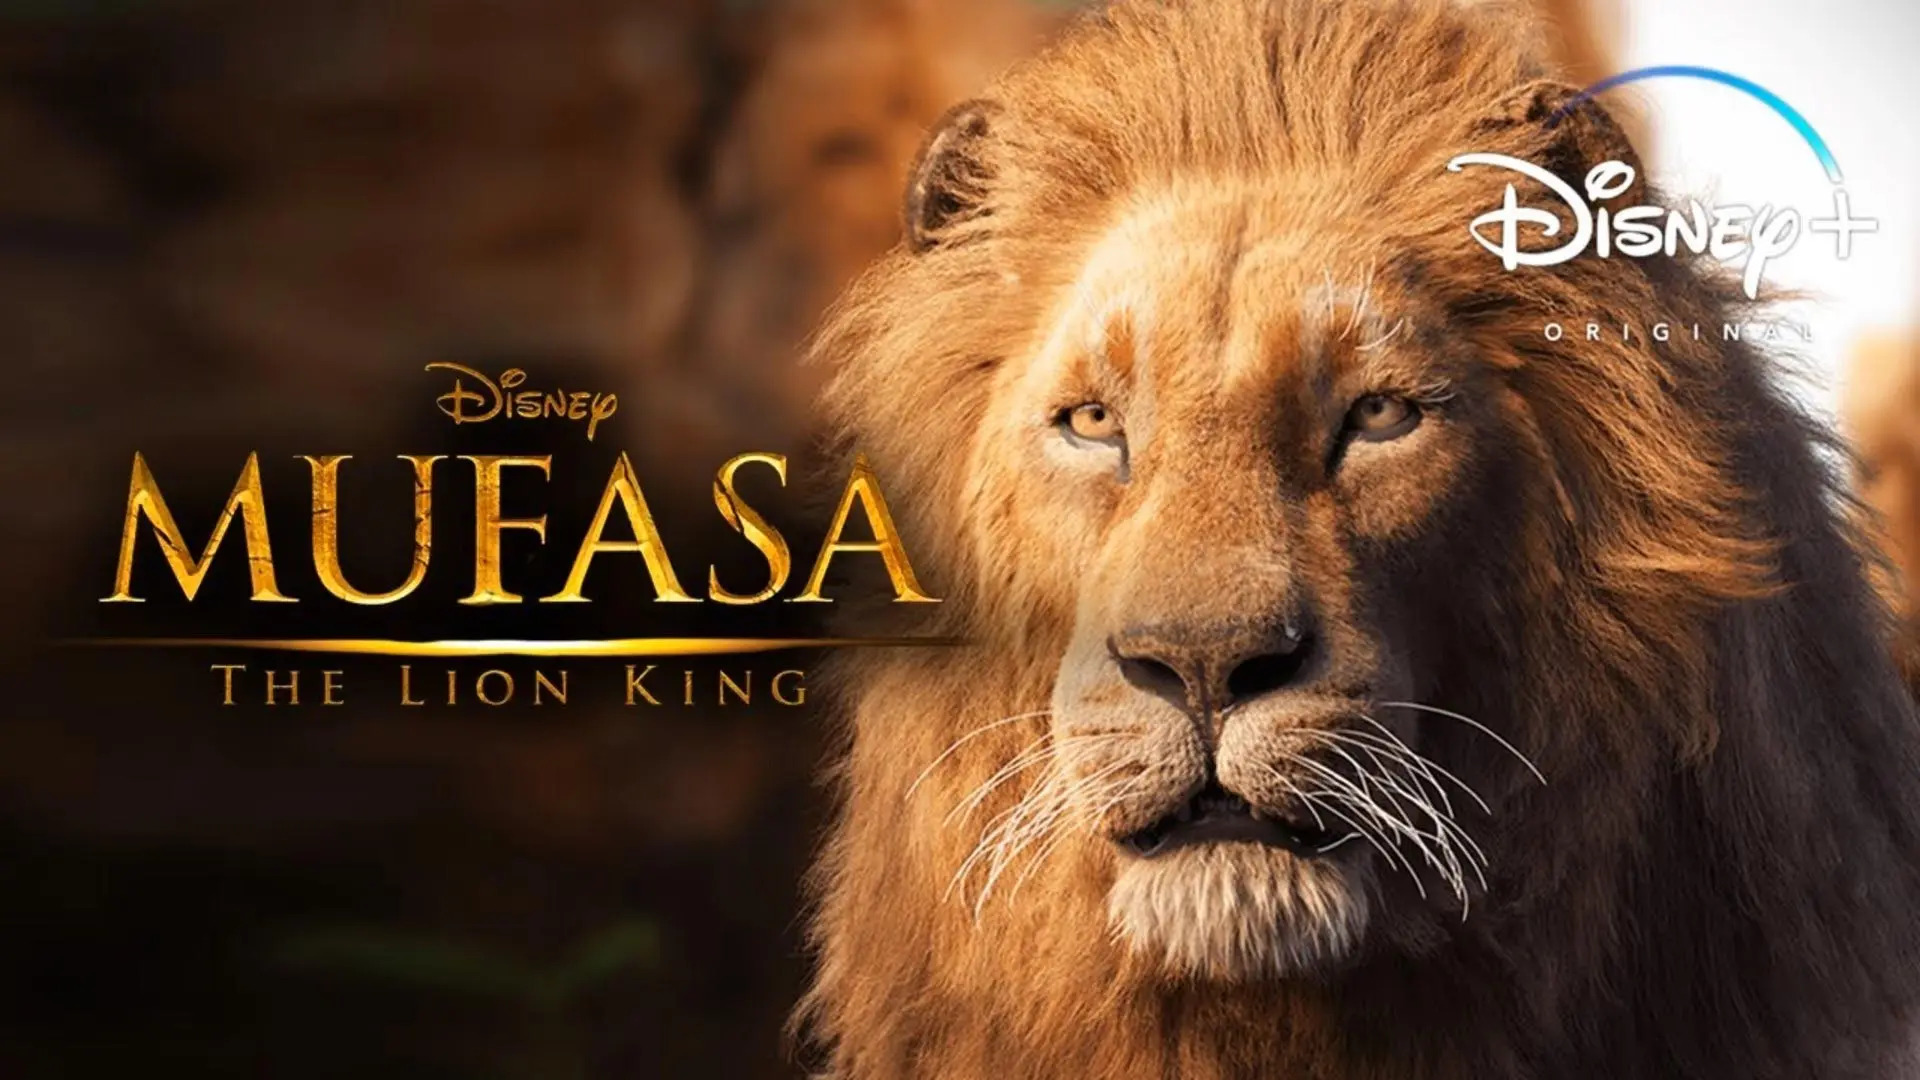 mufasa-lion-king-live-action-face-of-a-lion_9_11zon